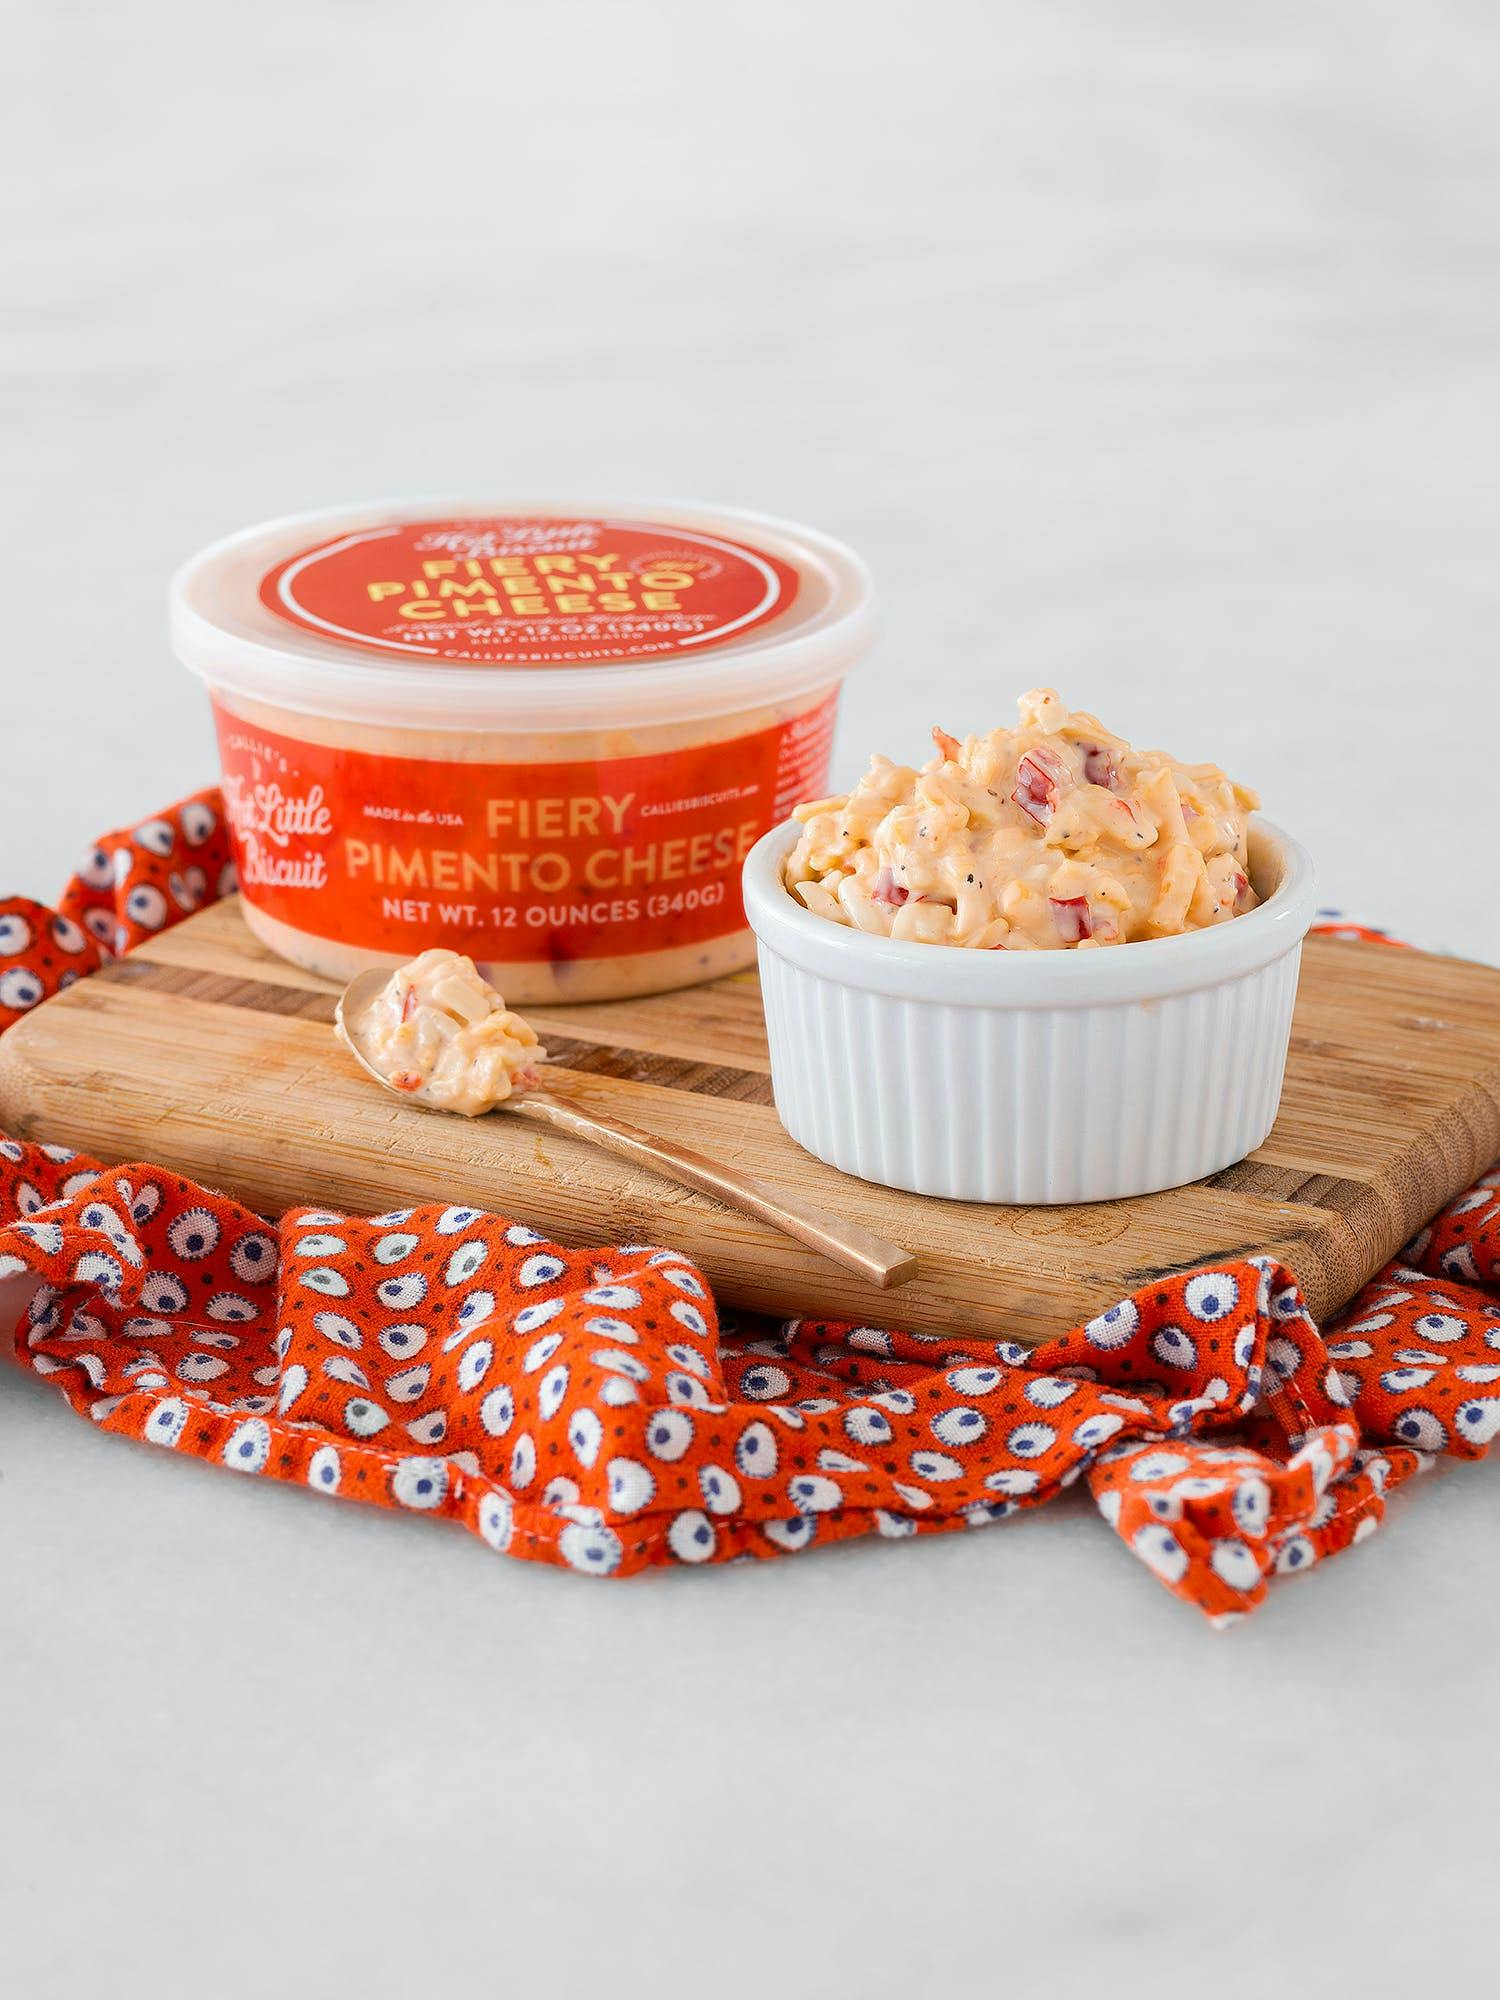 Pimento Cheese - Fiery 2 Pack by Callie's Hot Little Biscuit - Goldbelly